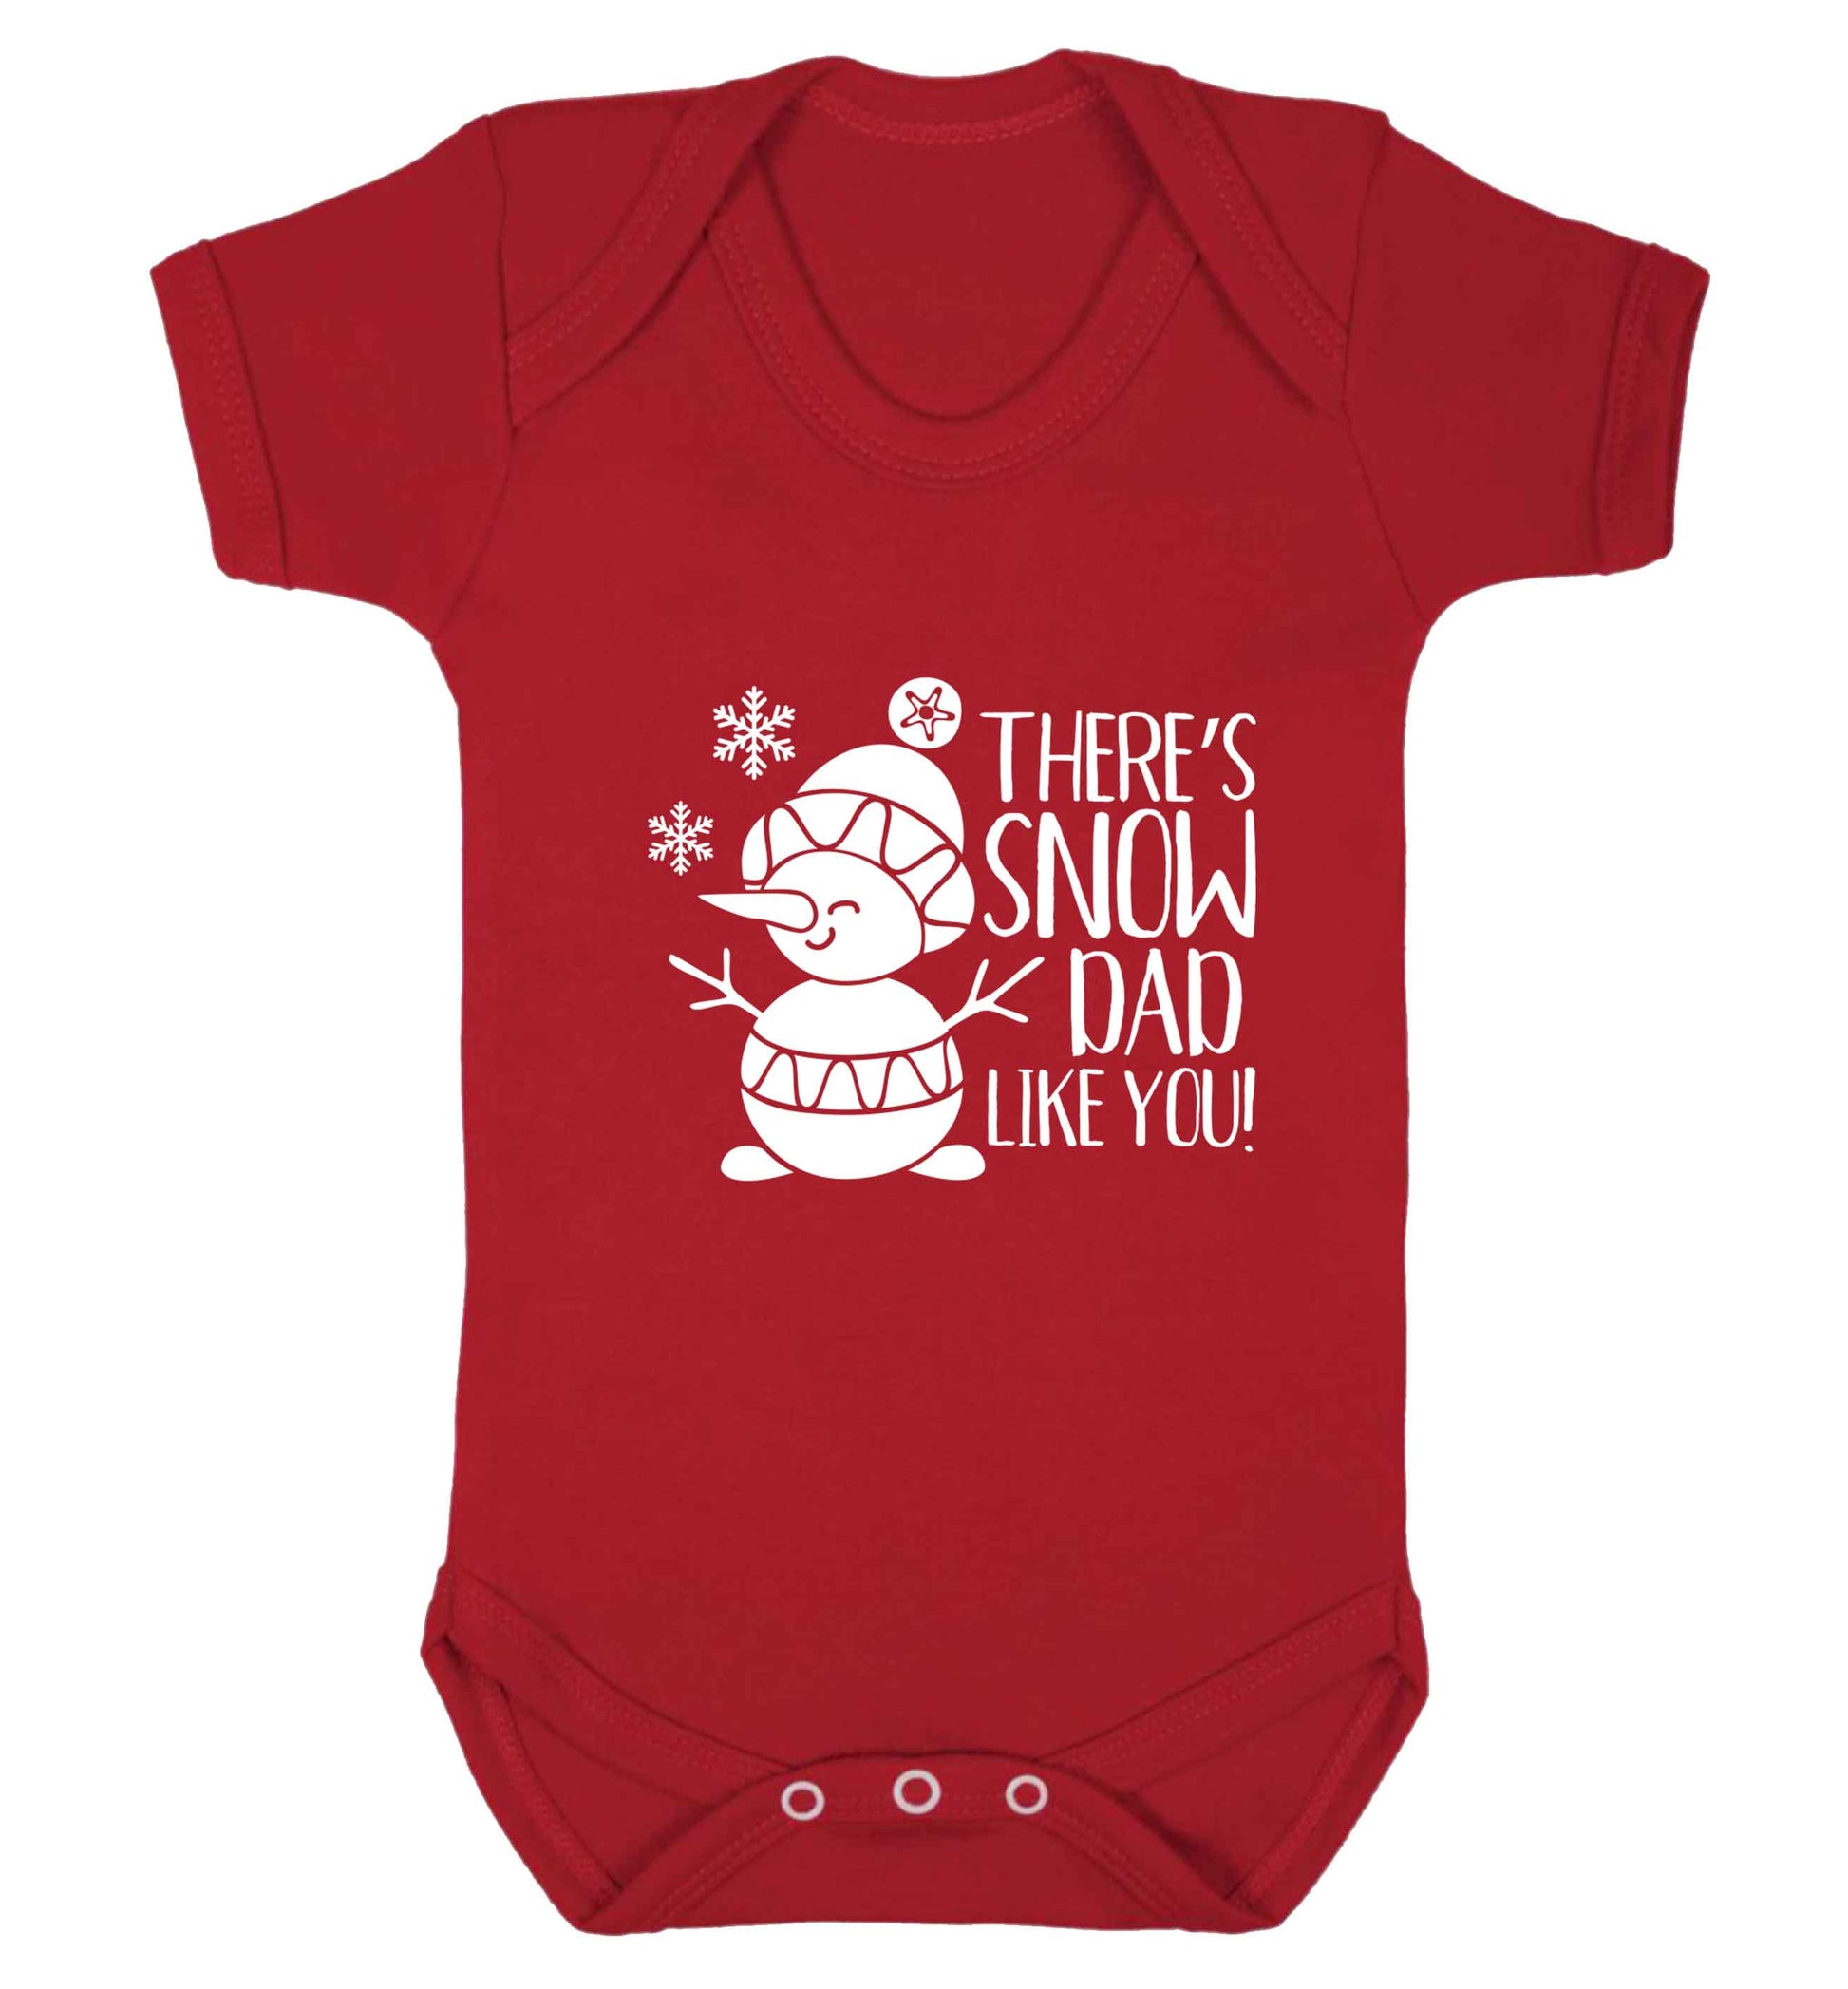 There's snow dad like you baby vest red 18-24 months